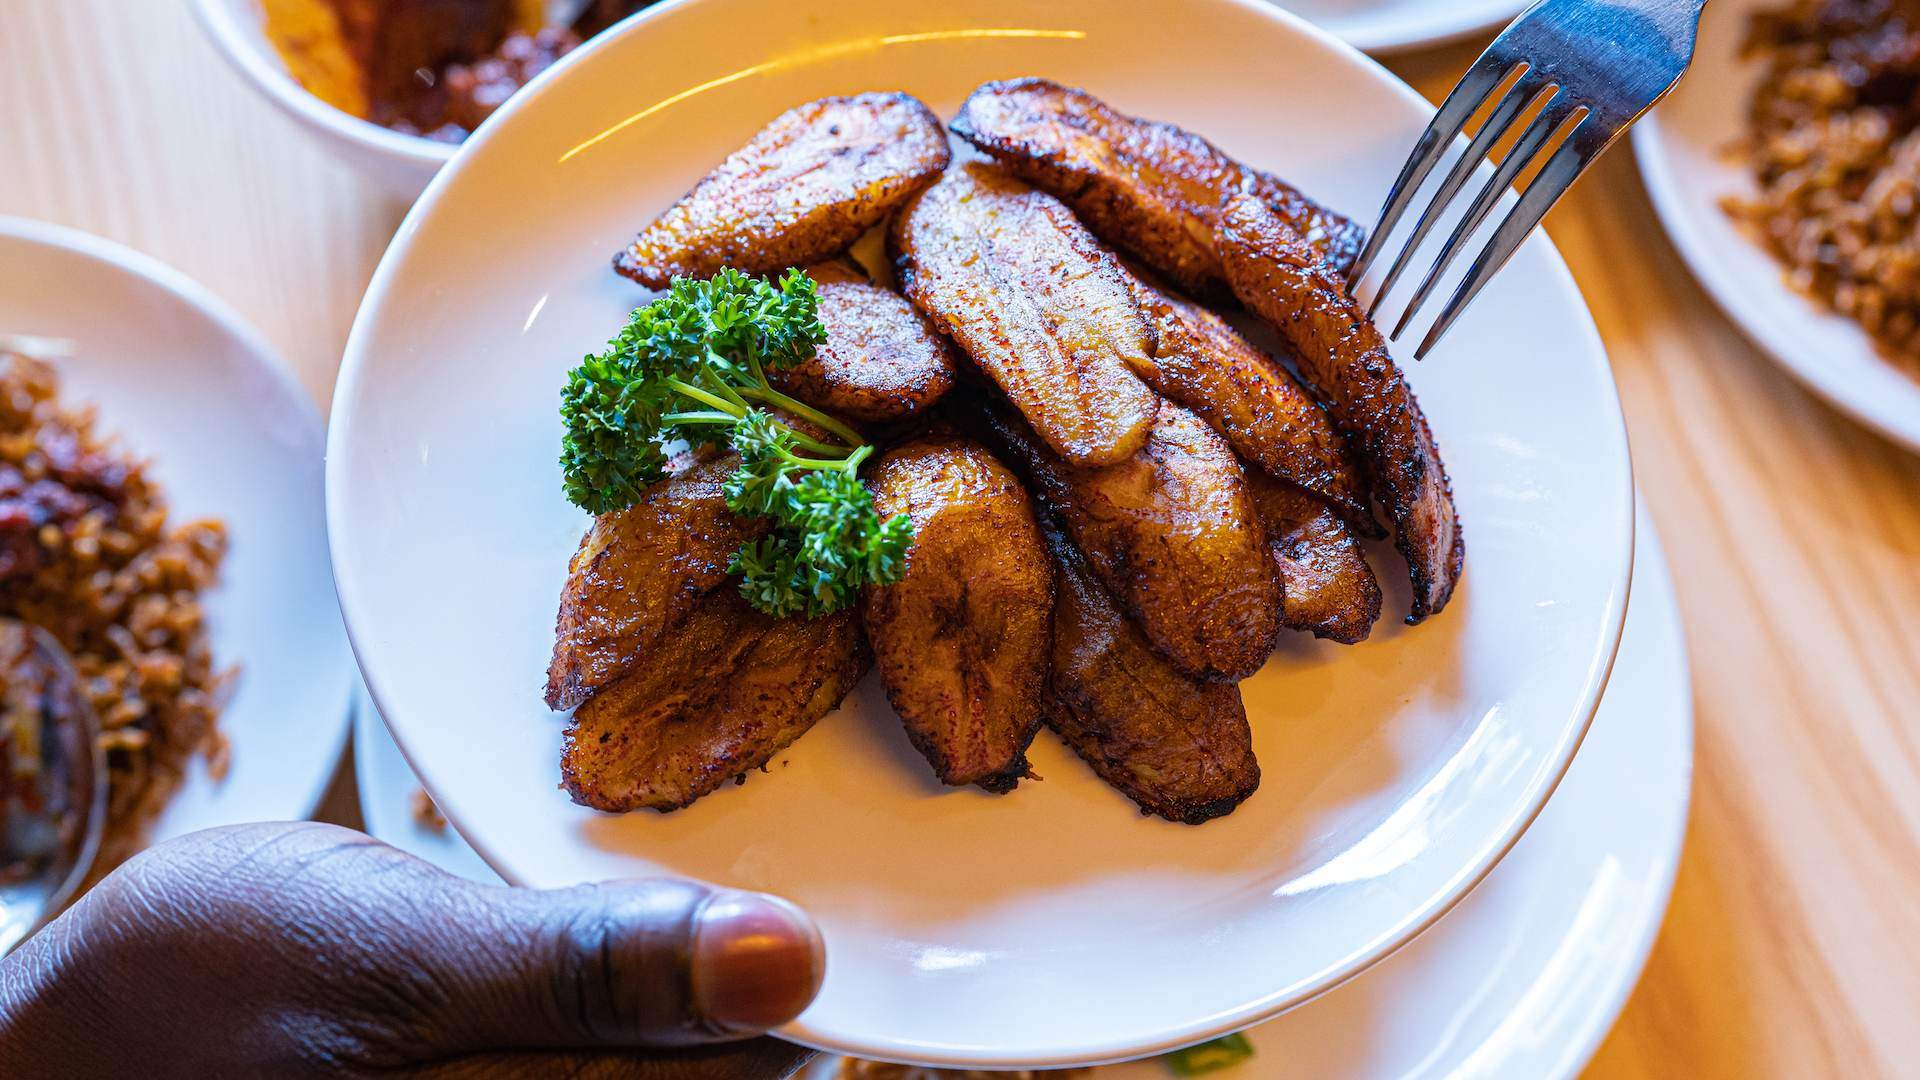 The Inner West's Popular Nigerian Pop-Up Little Lagos Has Opened a Permanent Diner and Bar